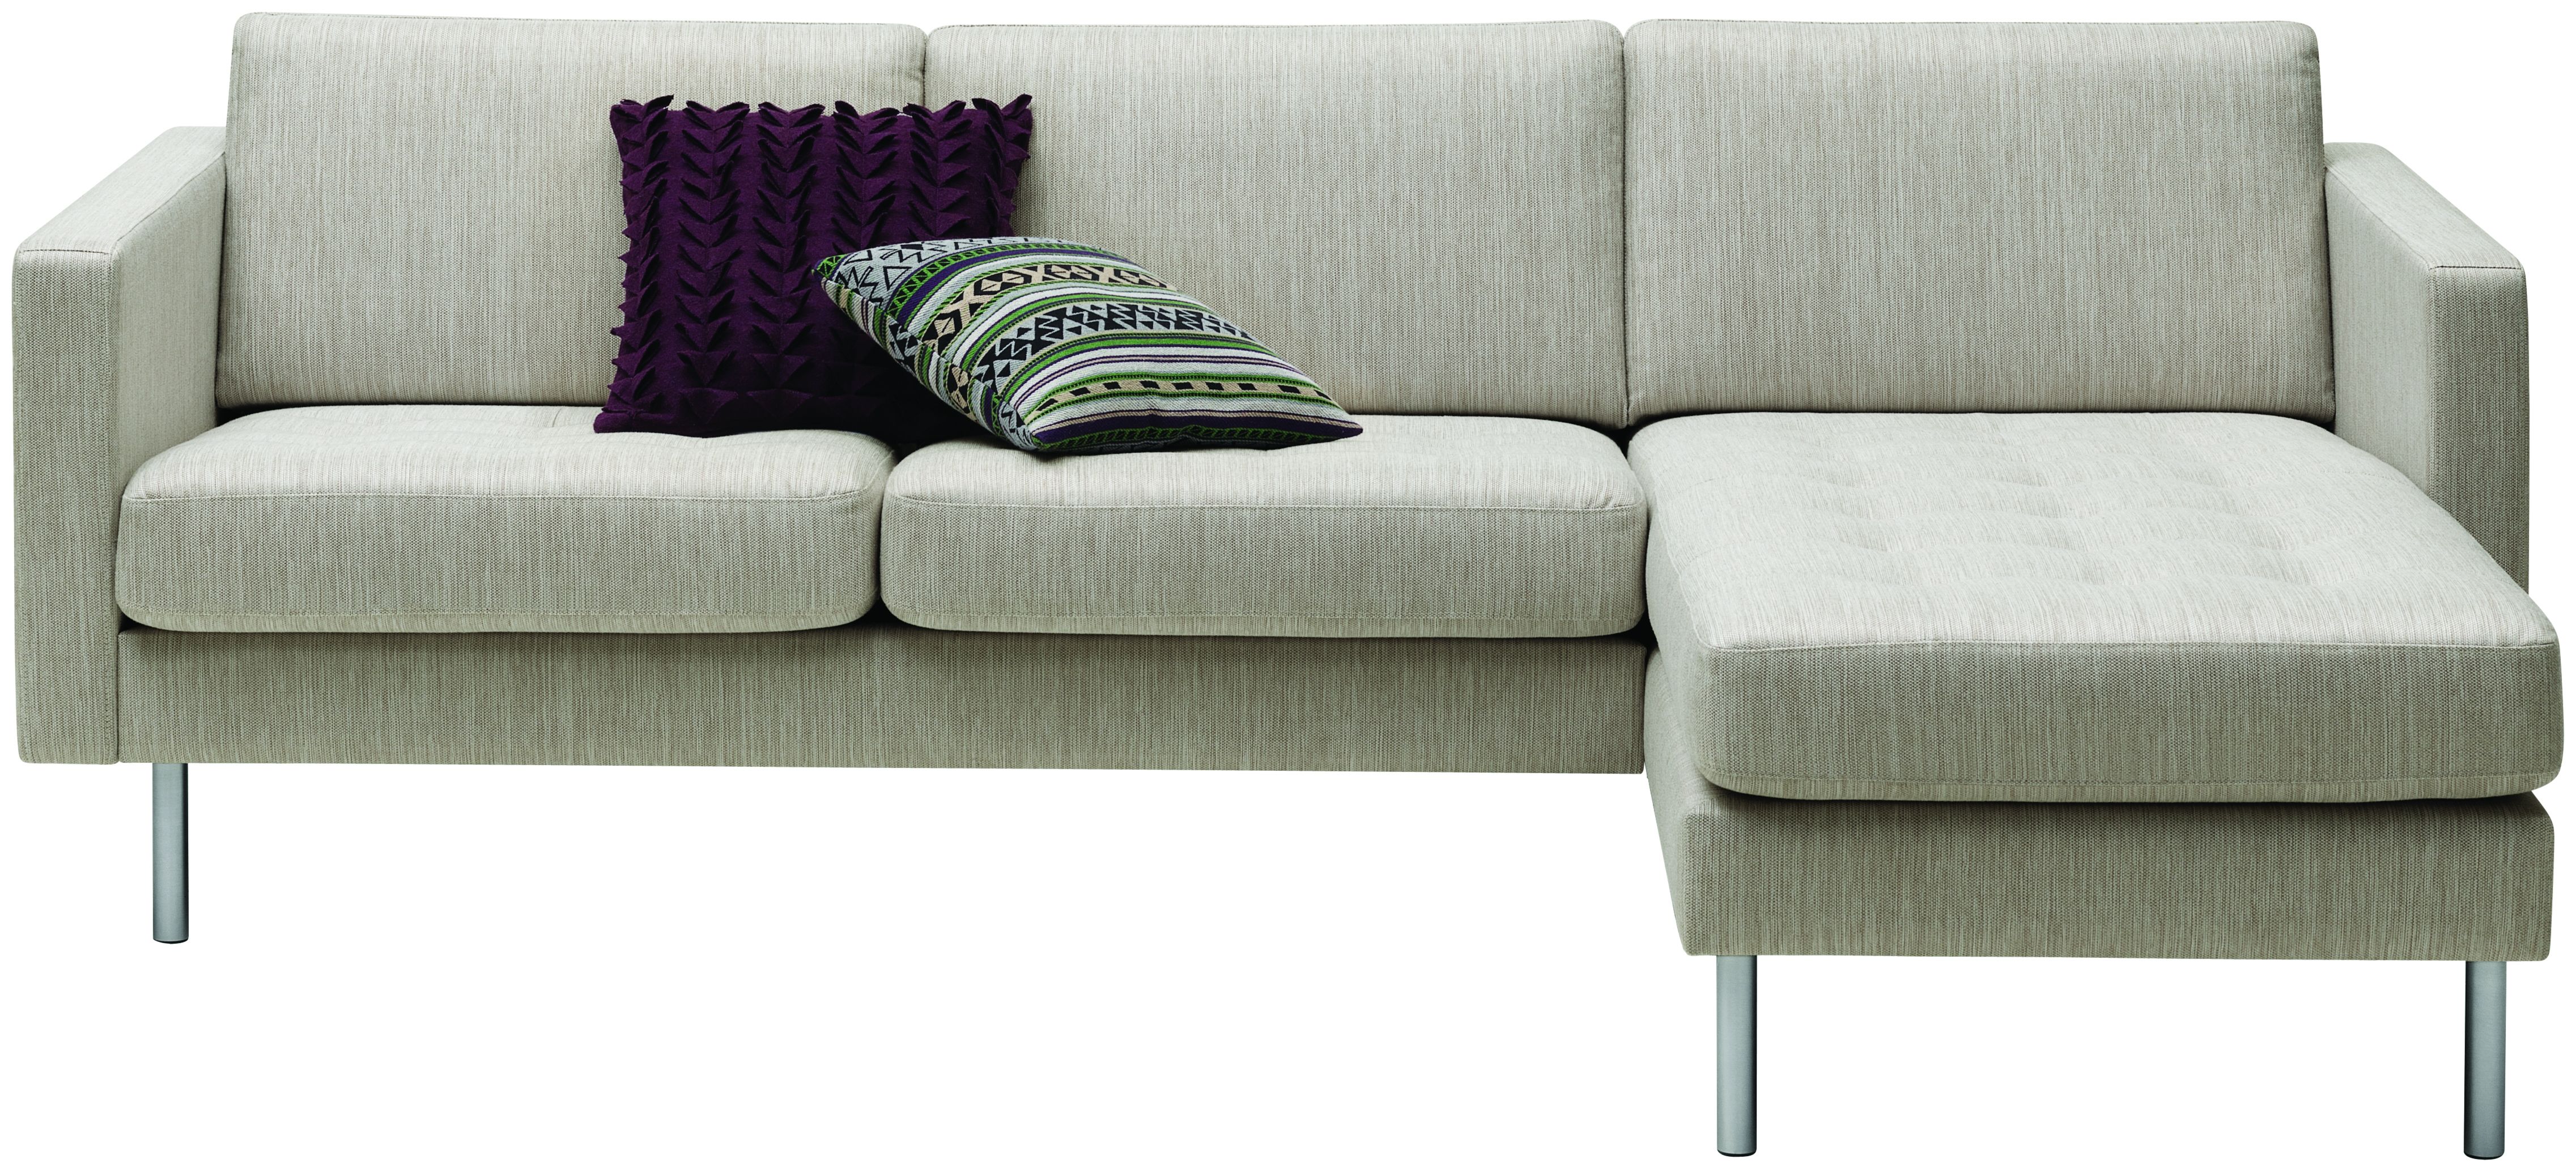 Olympia Sofas Boconcept Cambridge Intended For Customized Sofas (View 2 of 12)